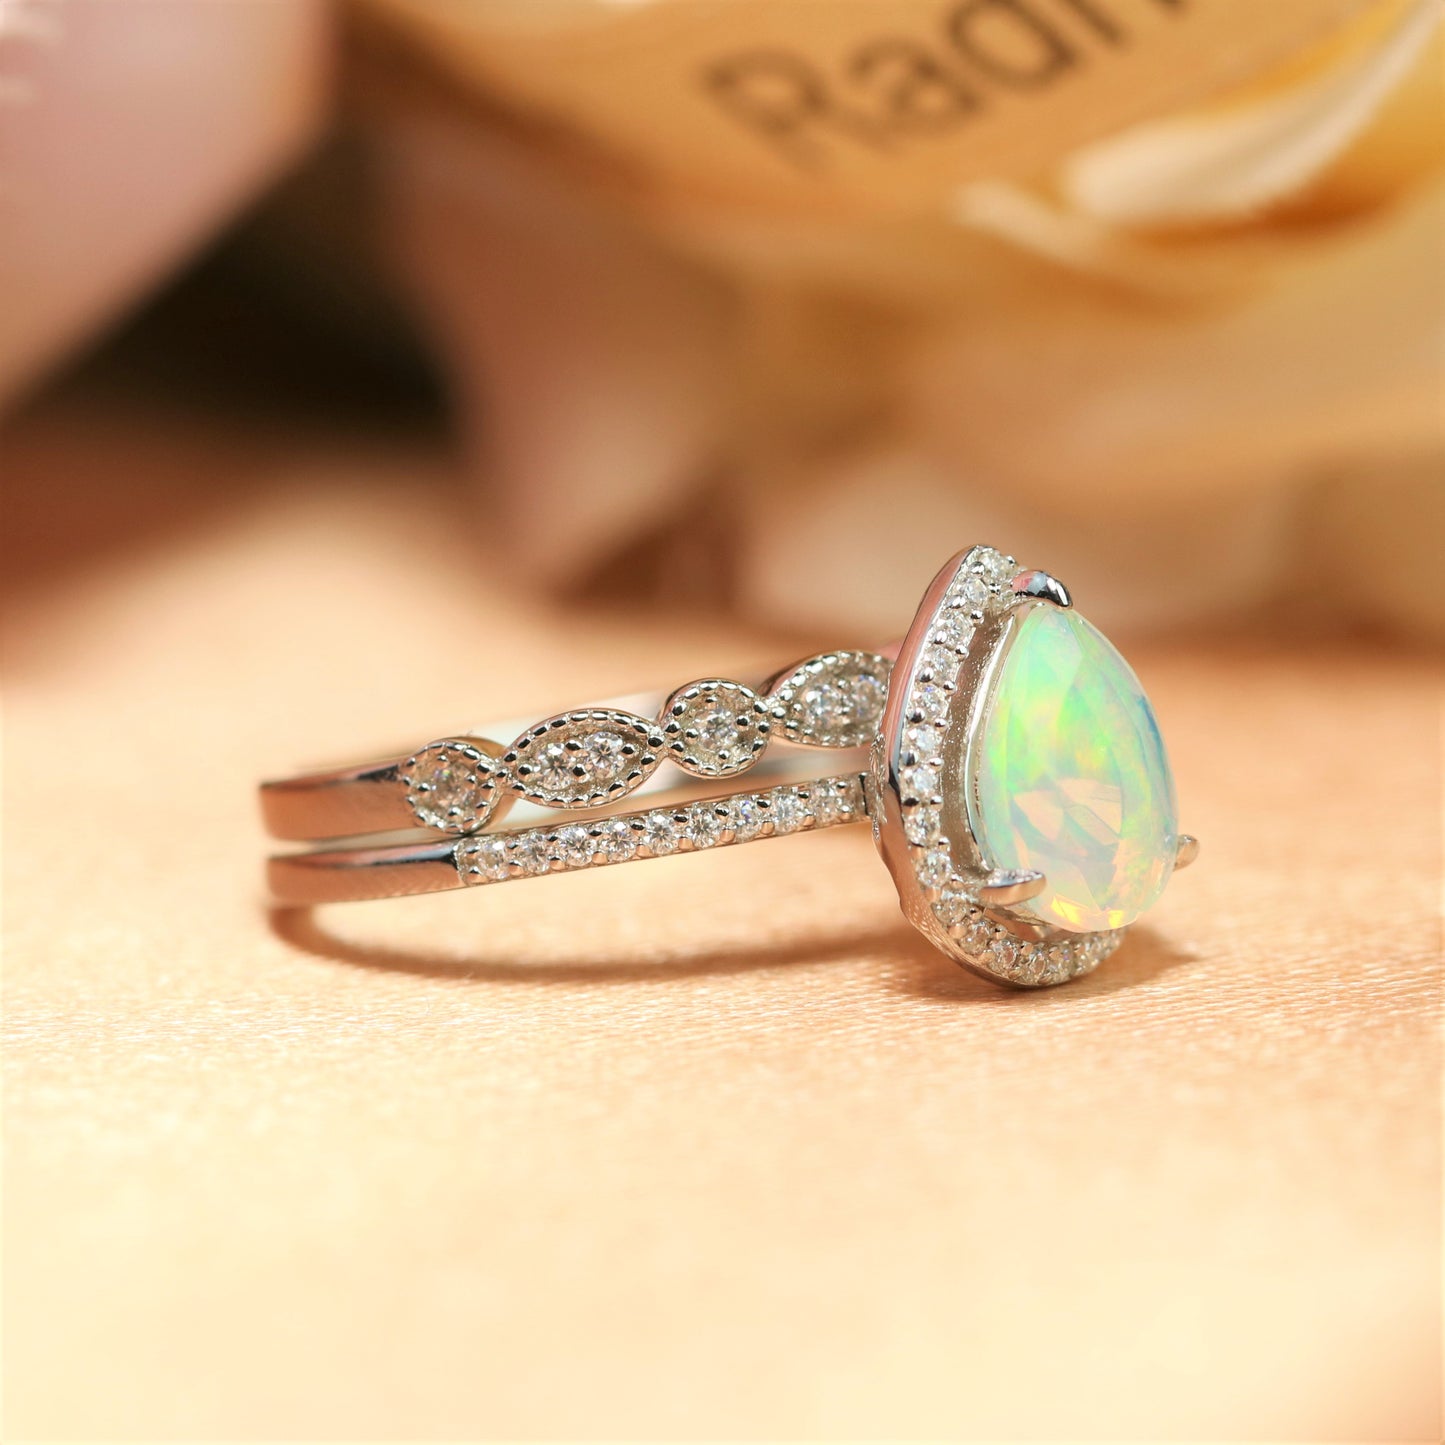 Perfect 1.6 Carat Fire Opal Tear Drop Wedding Ring Set with Matching Eternity Wedding Ring Band in White Gold